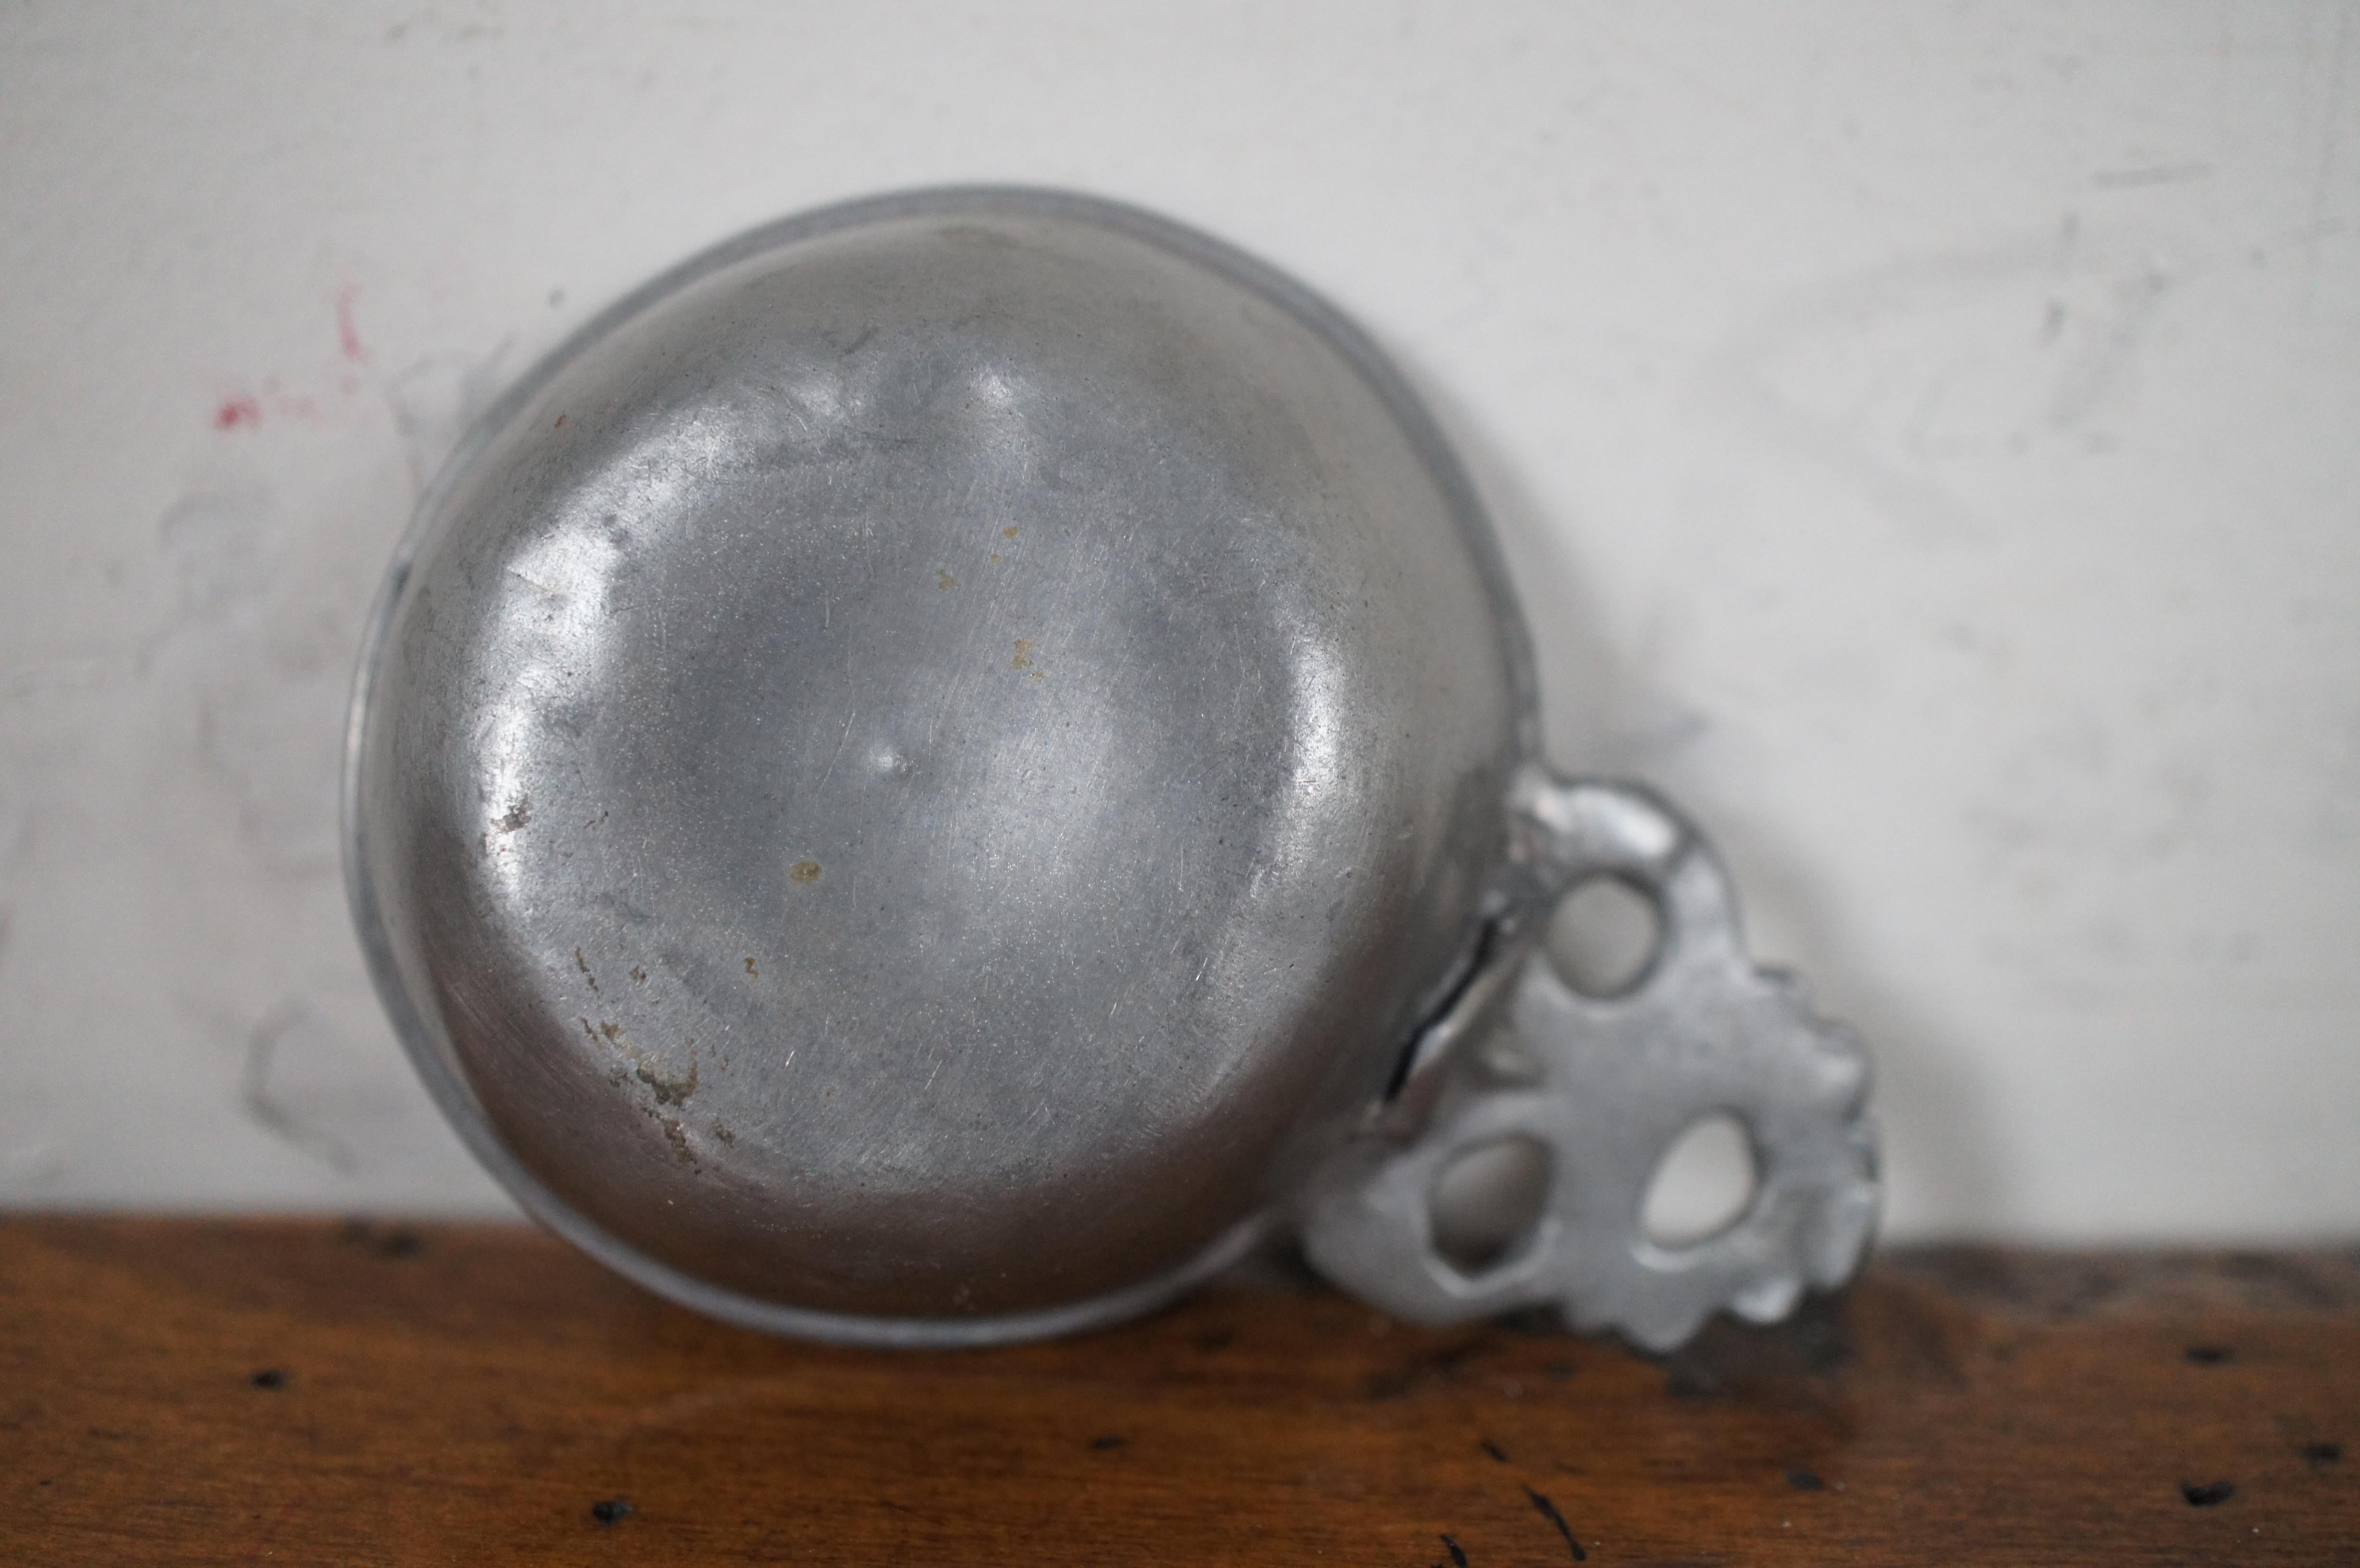 what is a porringer bowl used for